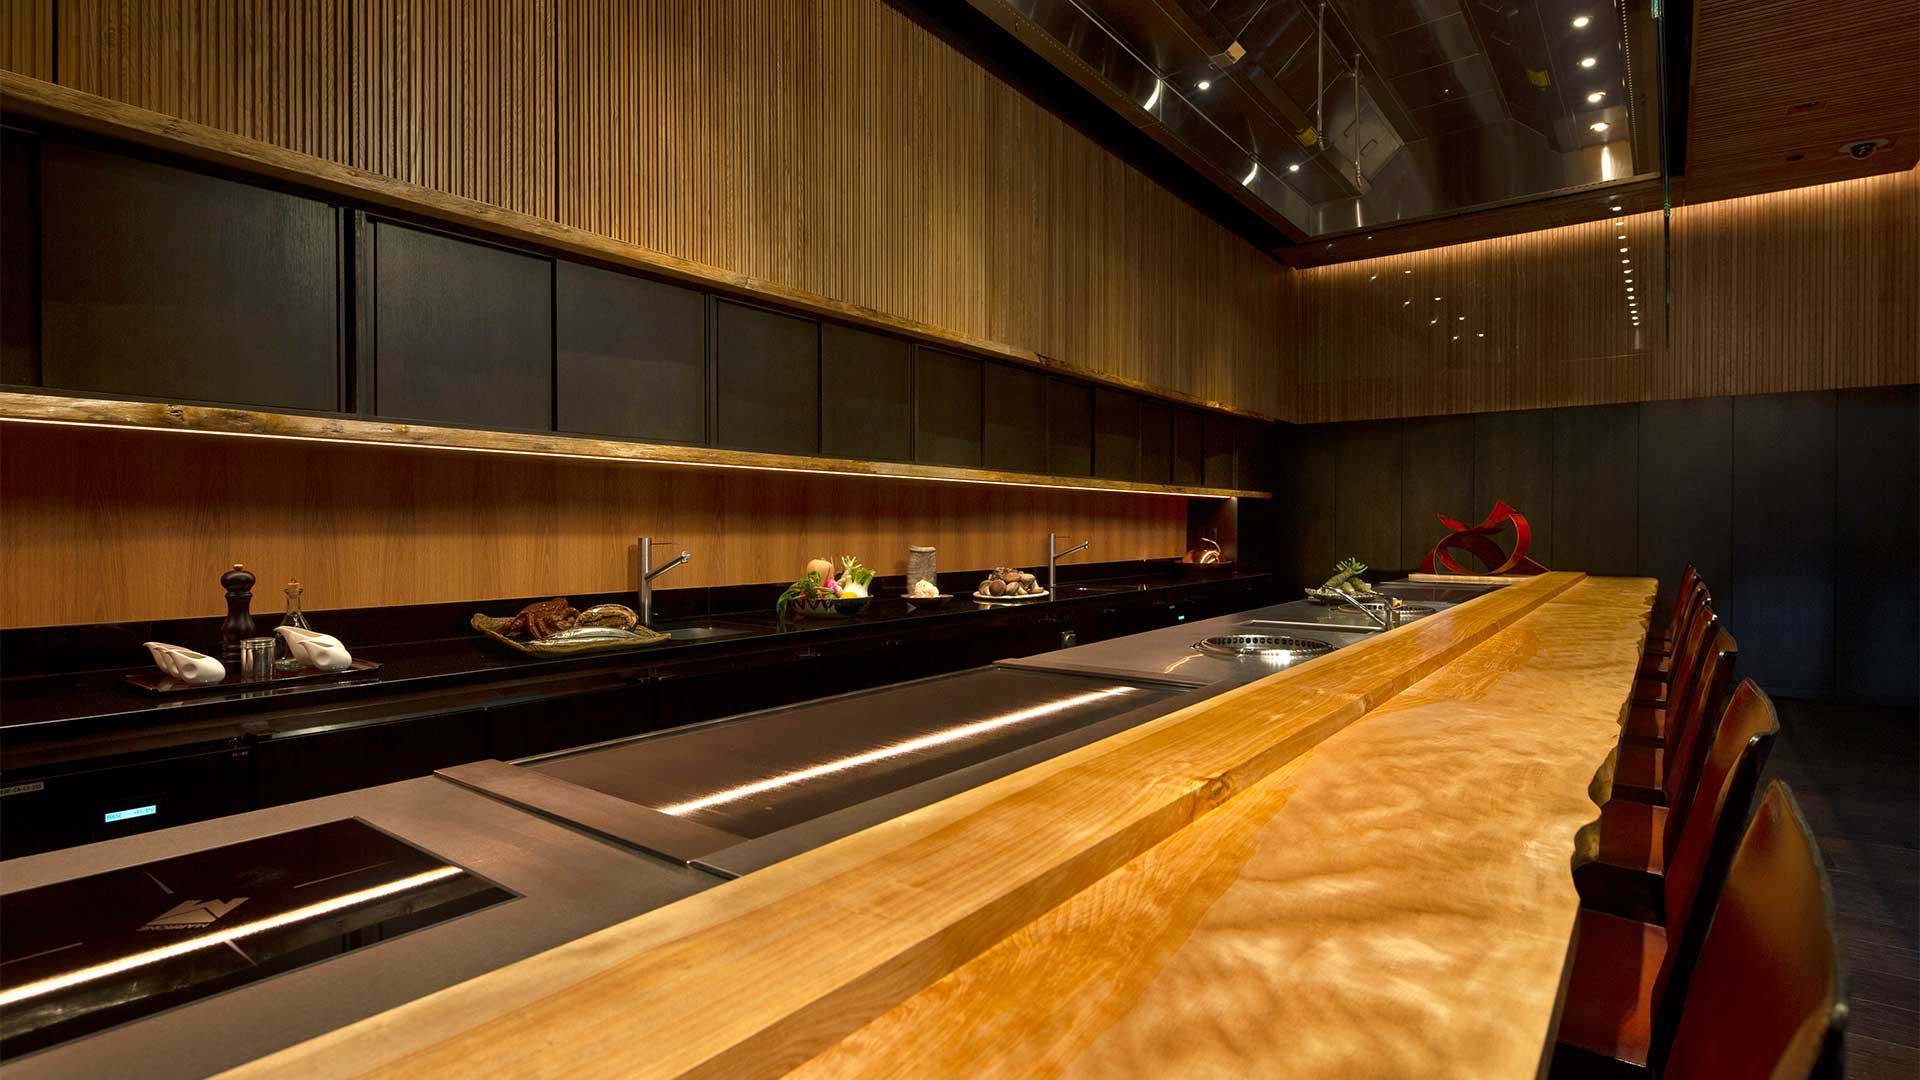 Dining at the Chef's Table of Waku Ghin, a restaurant with private rooms to hold private events